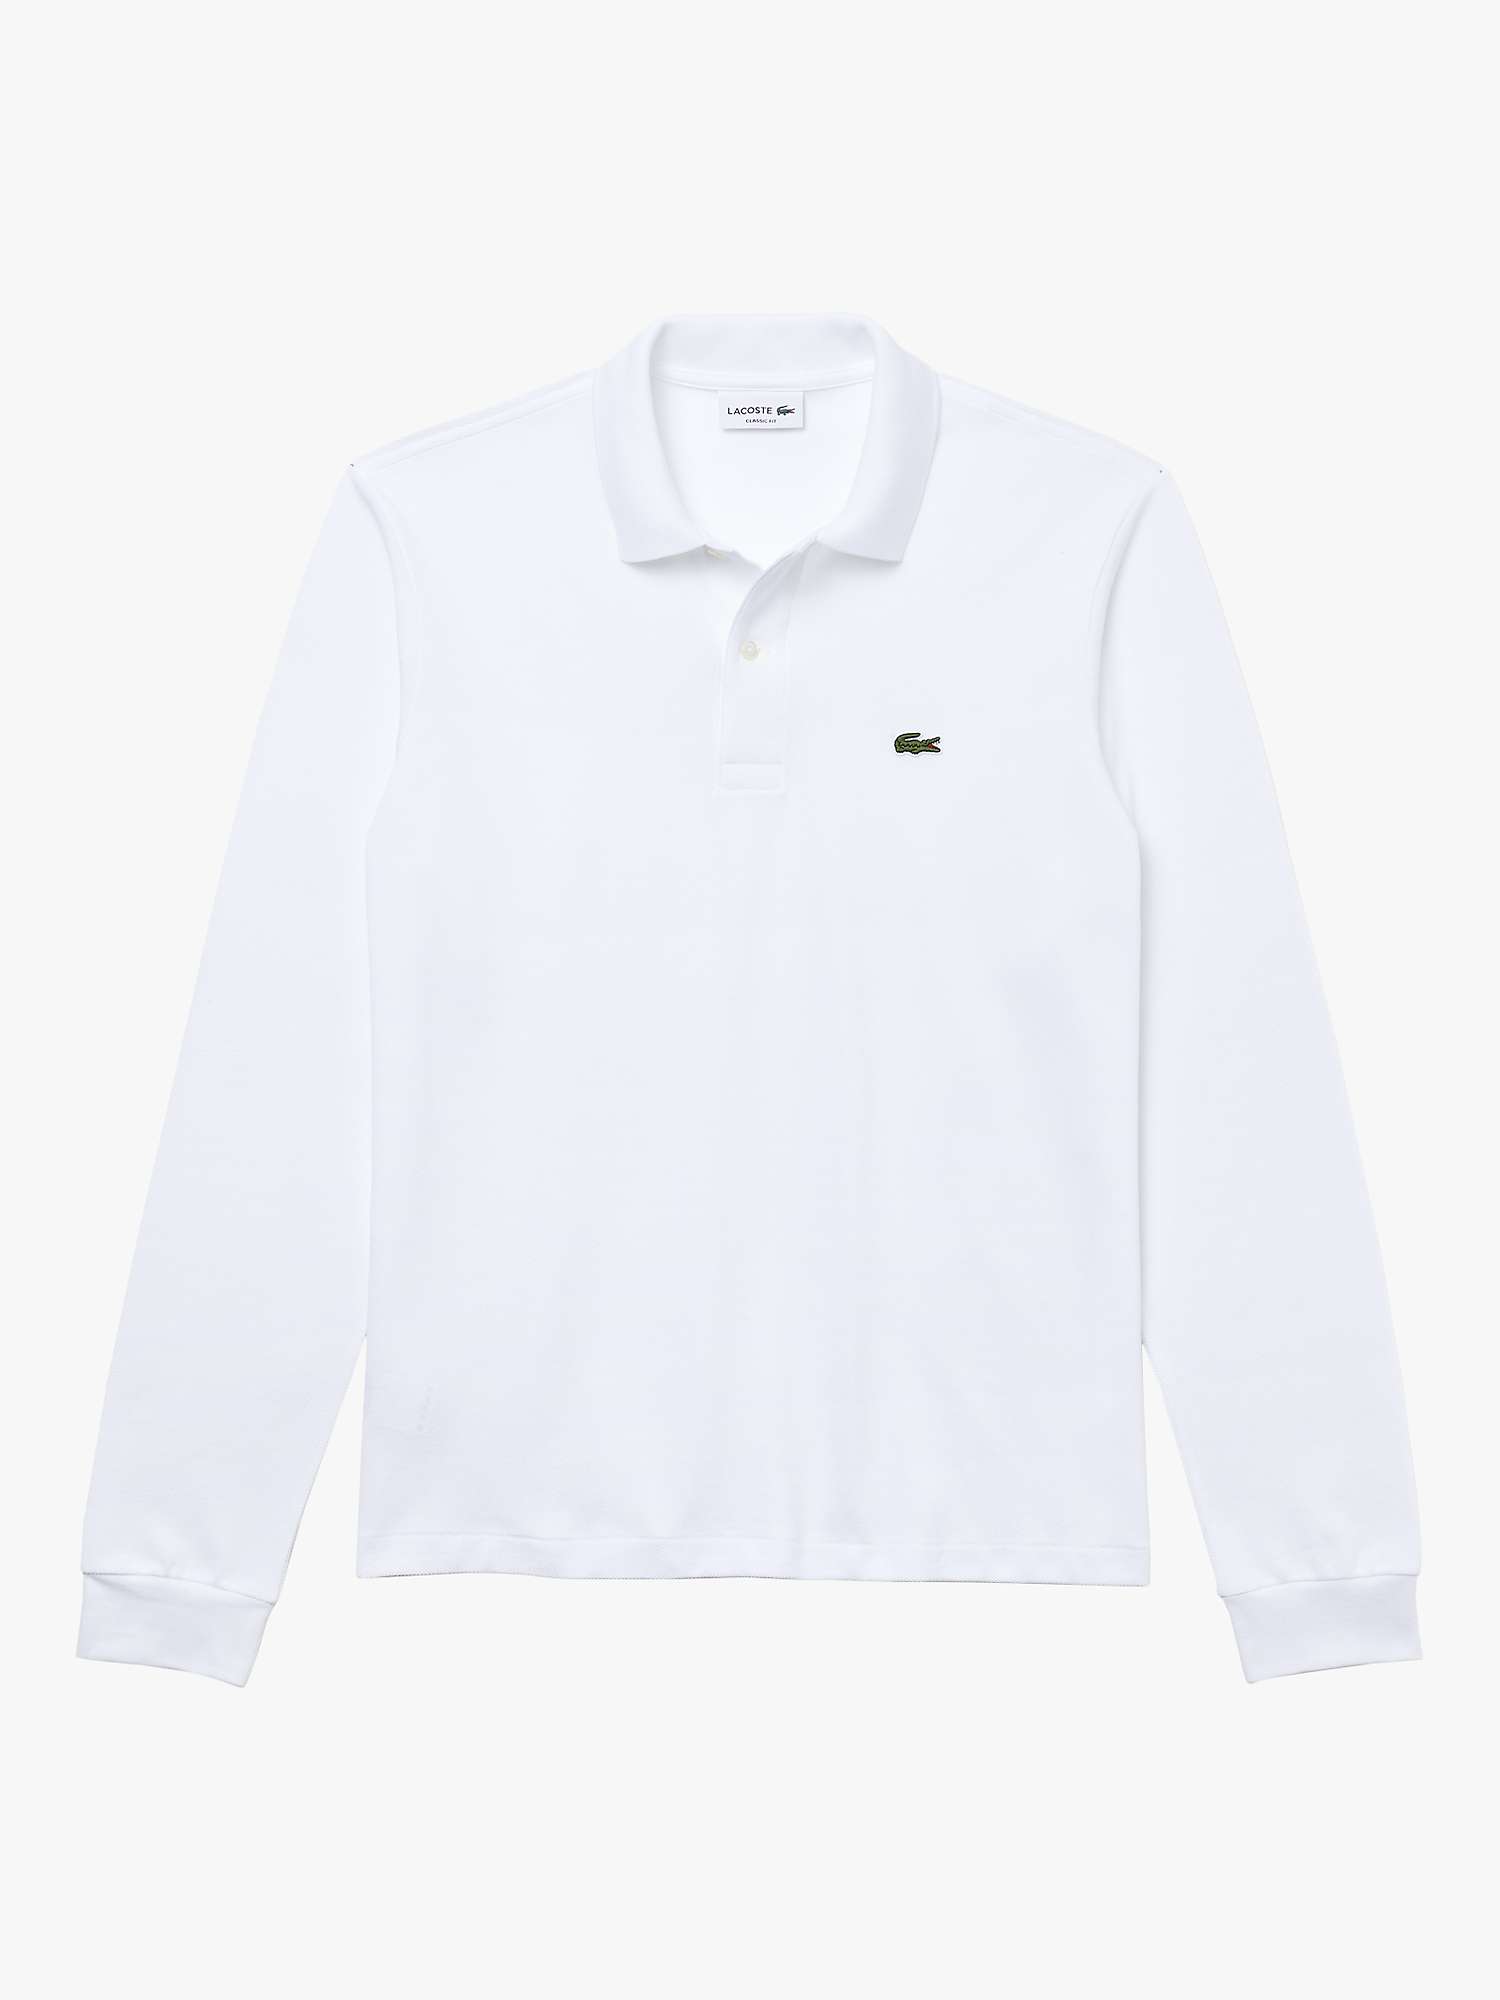 Buy Lacoste L.13.12 Classic Regular Fit Long Sleeve Polo Shirt Online at johnlewis.com